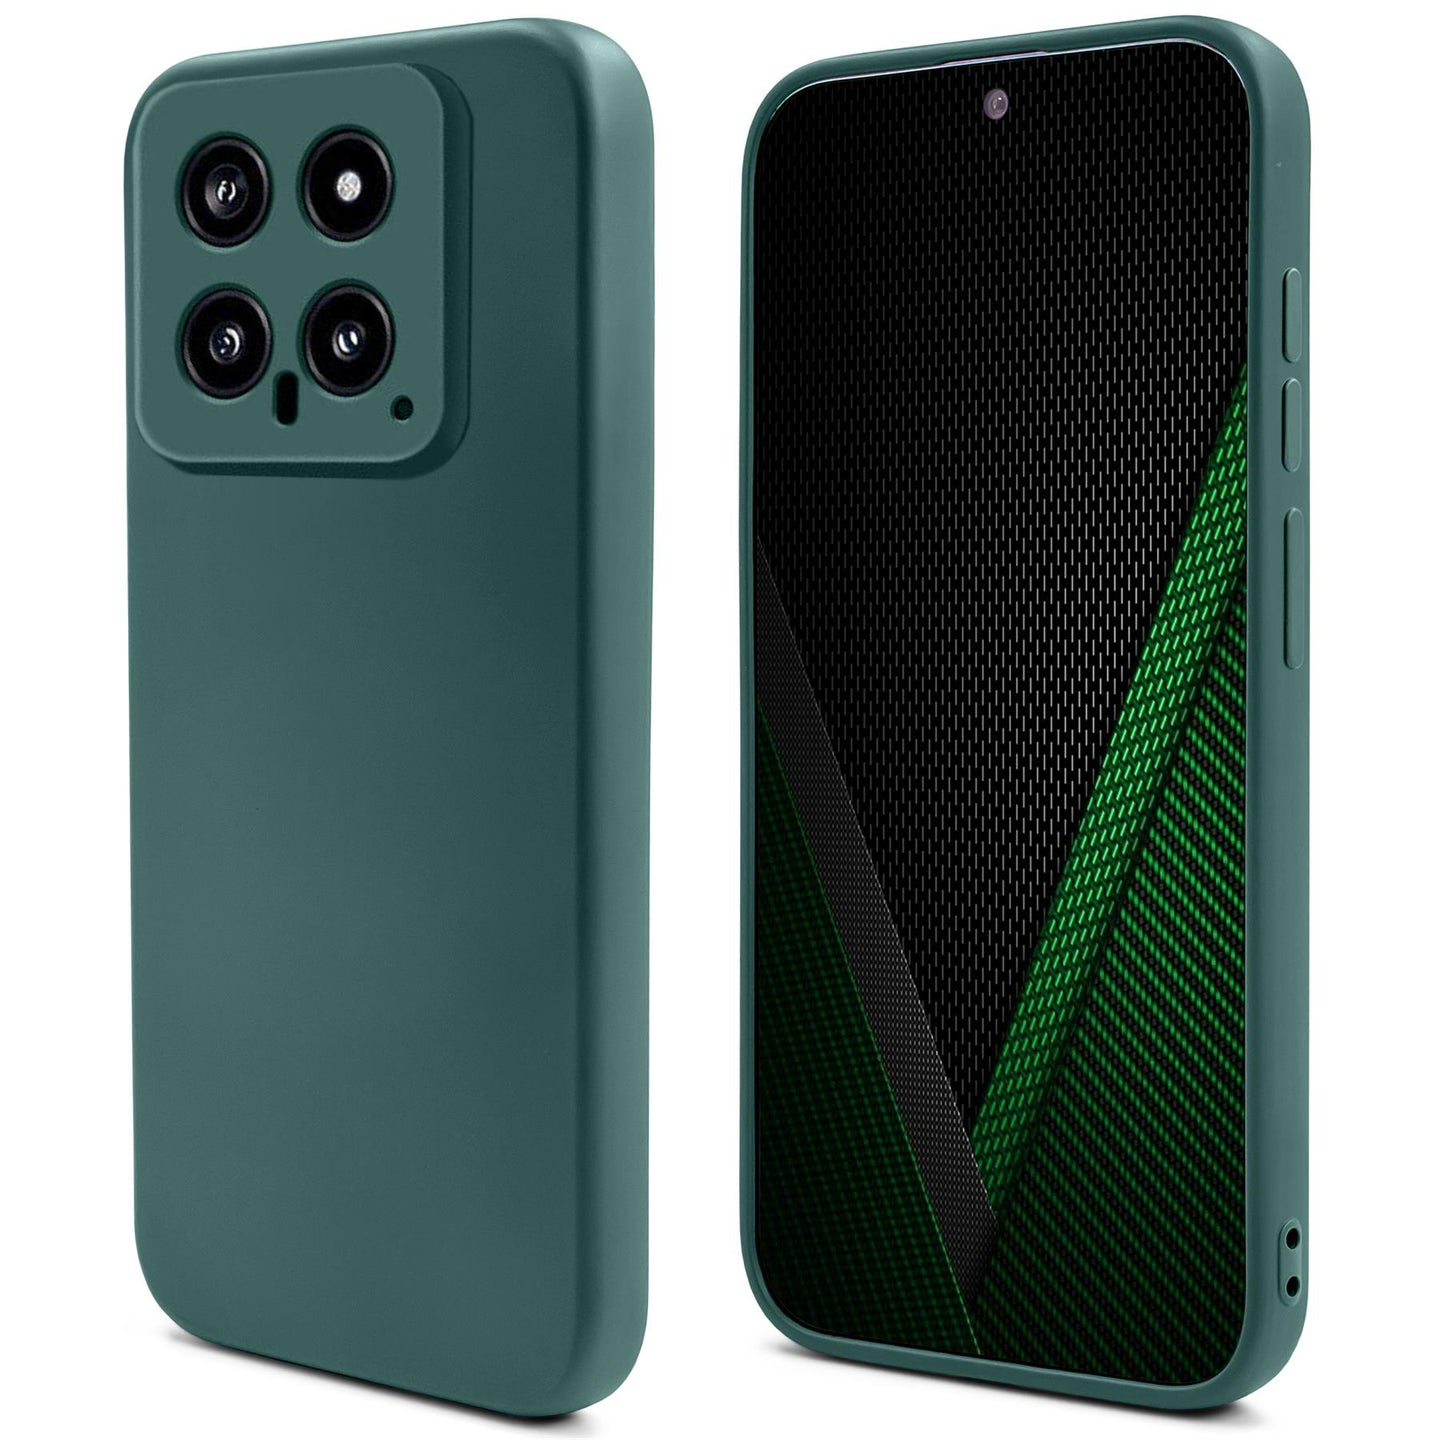 Moozy Lifestyle. Silicone Case for Xiaomi 14, Dark Green - Liquid Silicone Lightweight Cover with Matte Finish and Soft Microfiber Lining, Premium Silicone Case